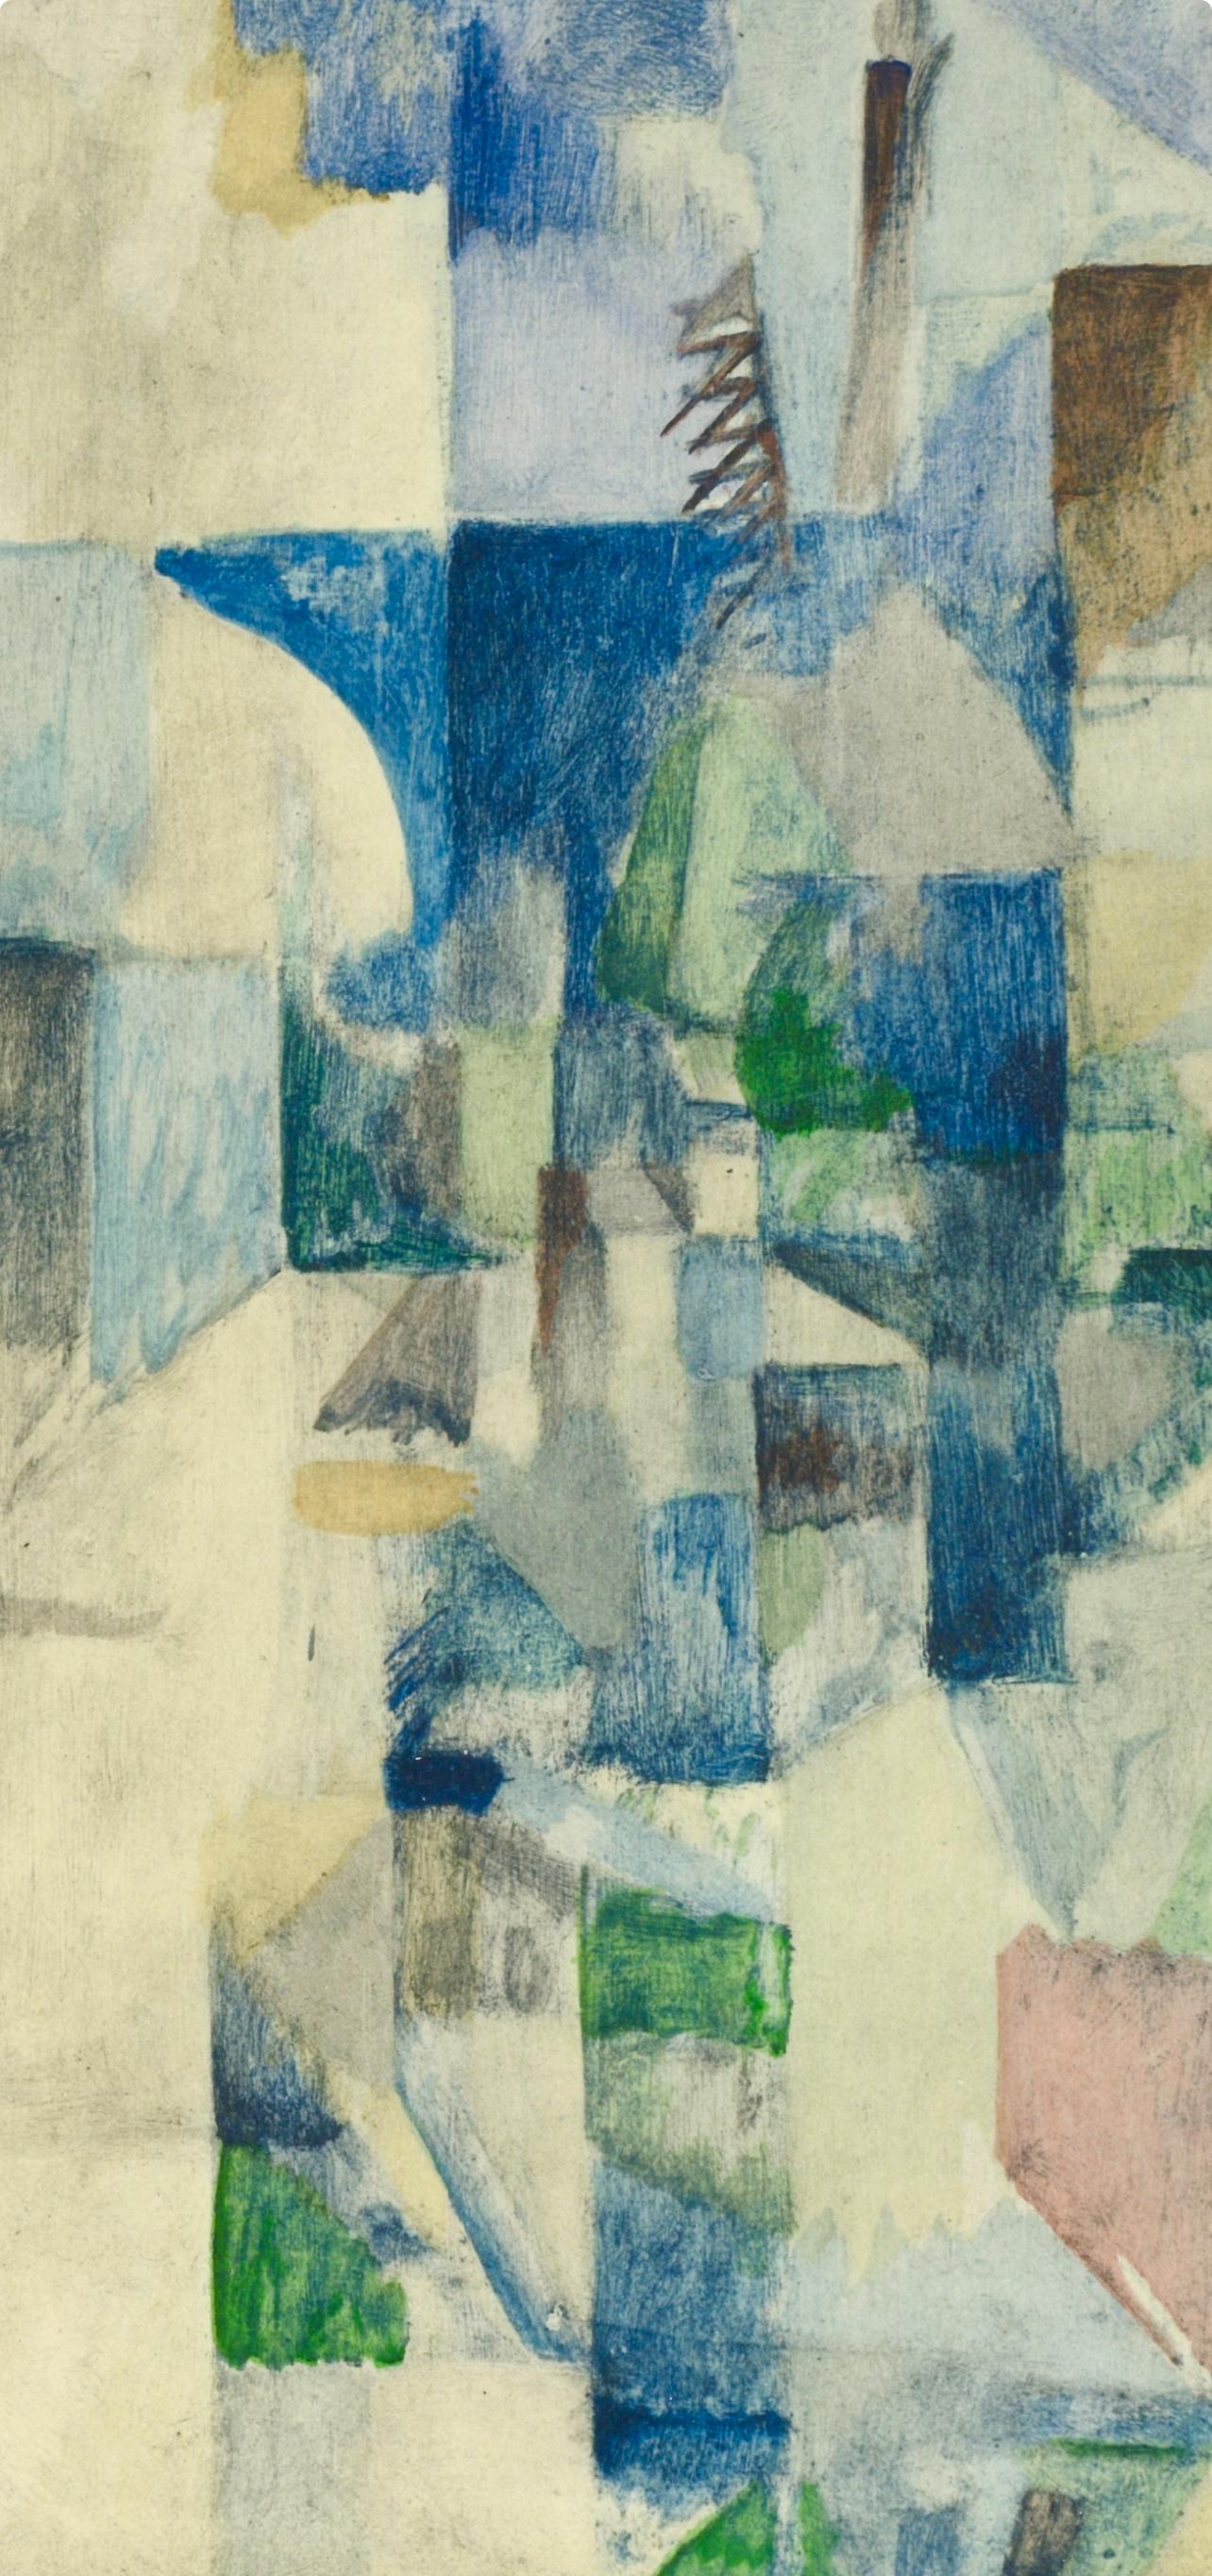 Delaunay, La fenetre No. 2, XXe Siècle (after) - Modern Print by Robert Delaunay